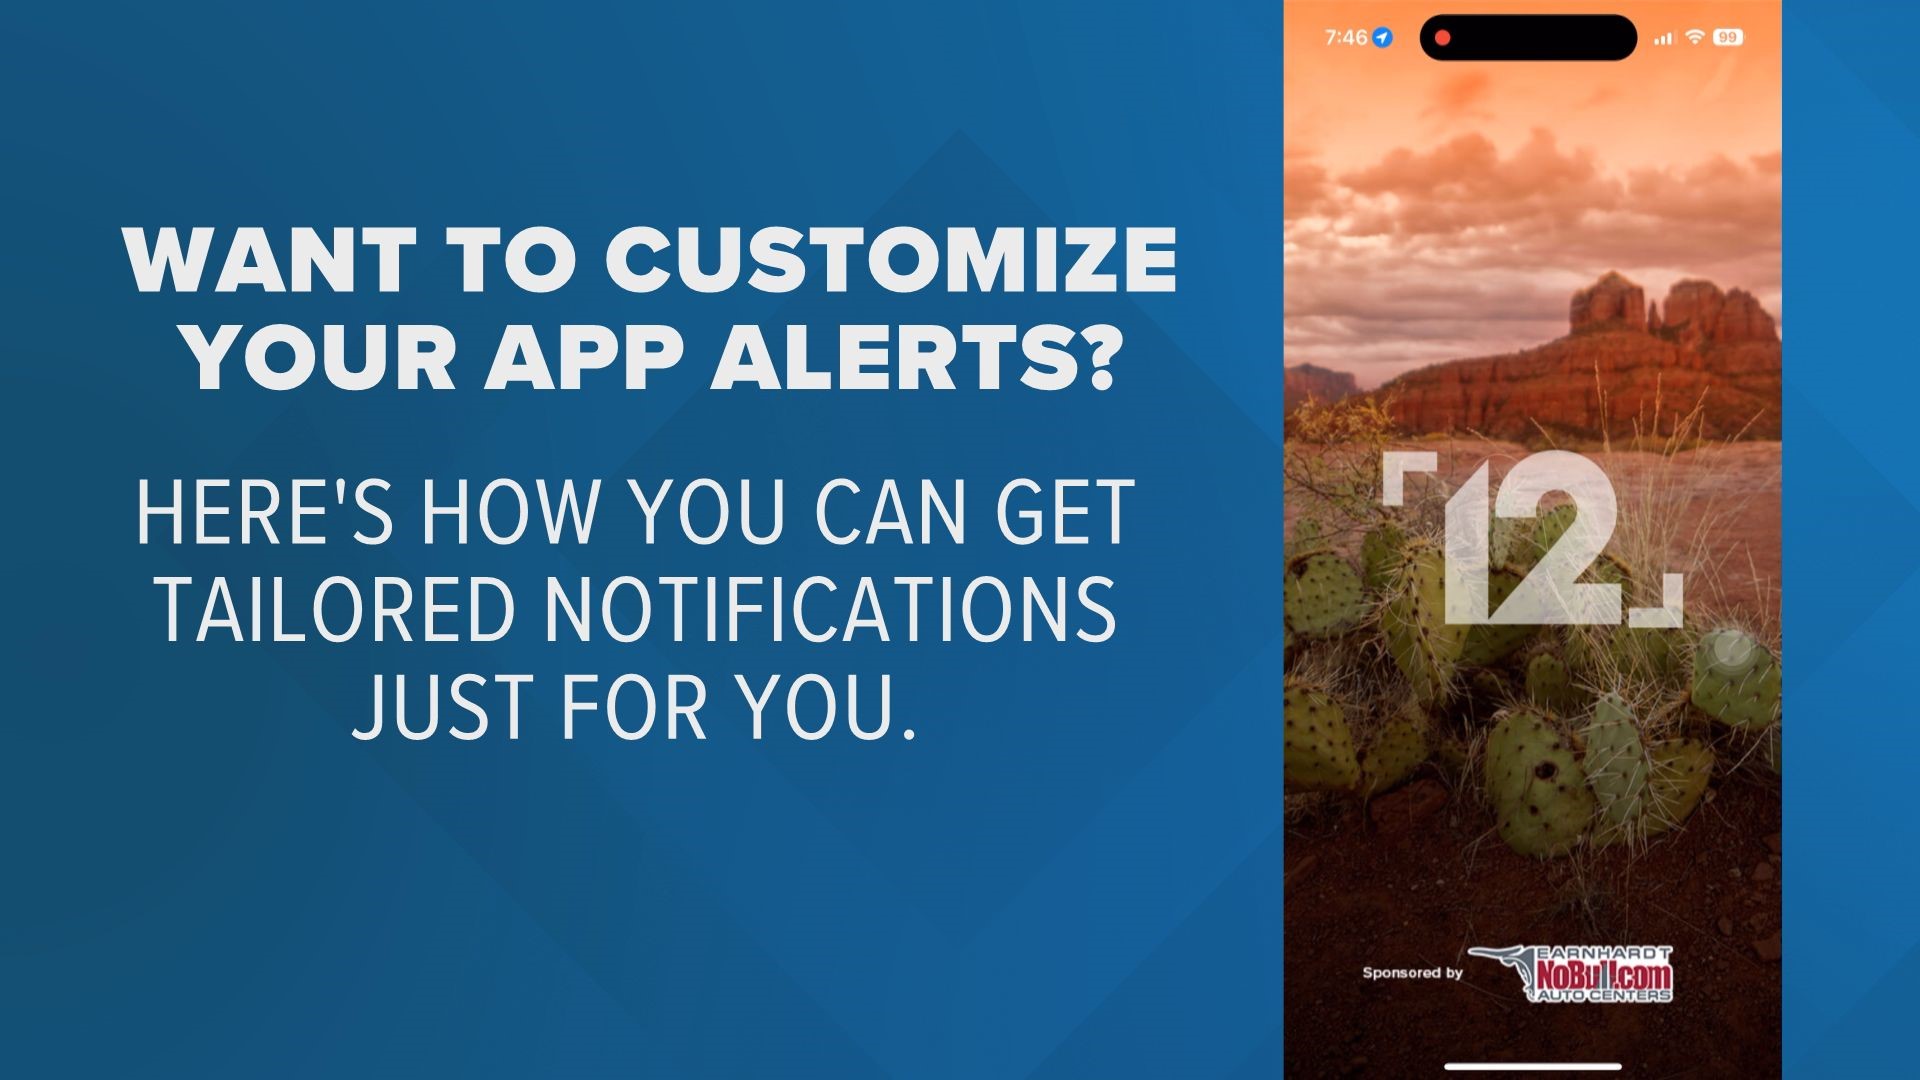 Here's a step-by-step guide to set up the notifications on the 12News app to receive alerts for various topics.